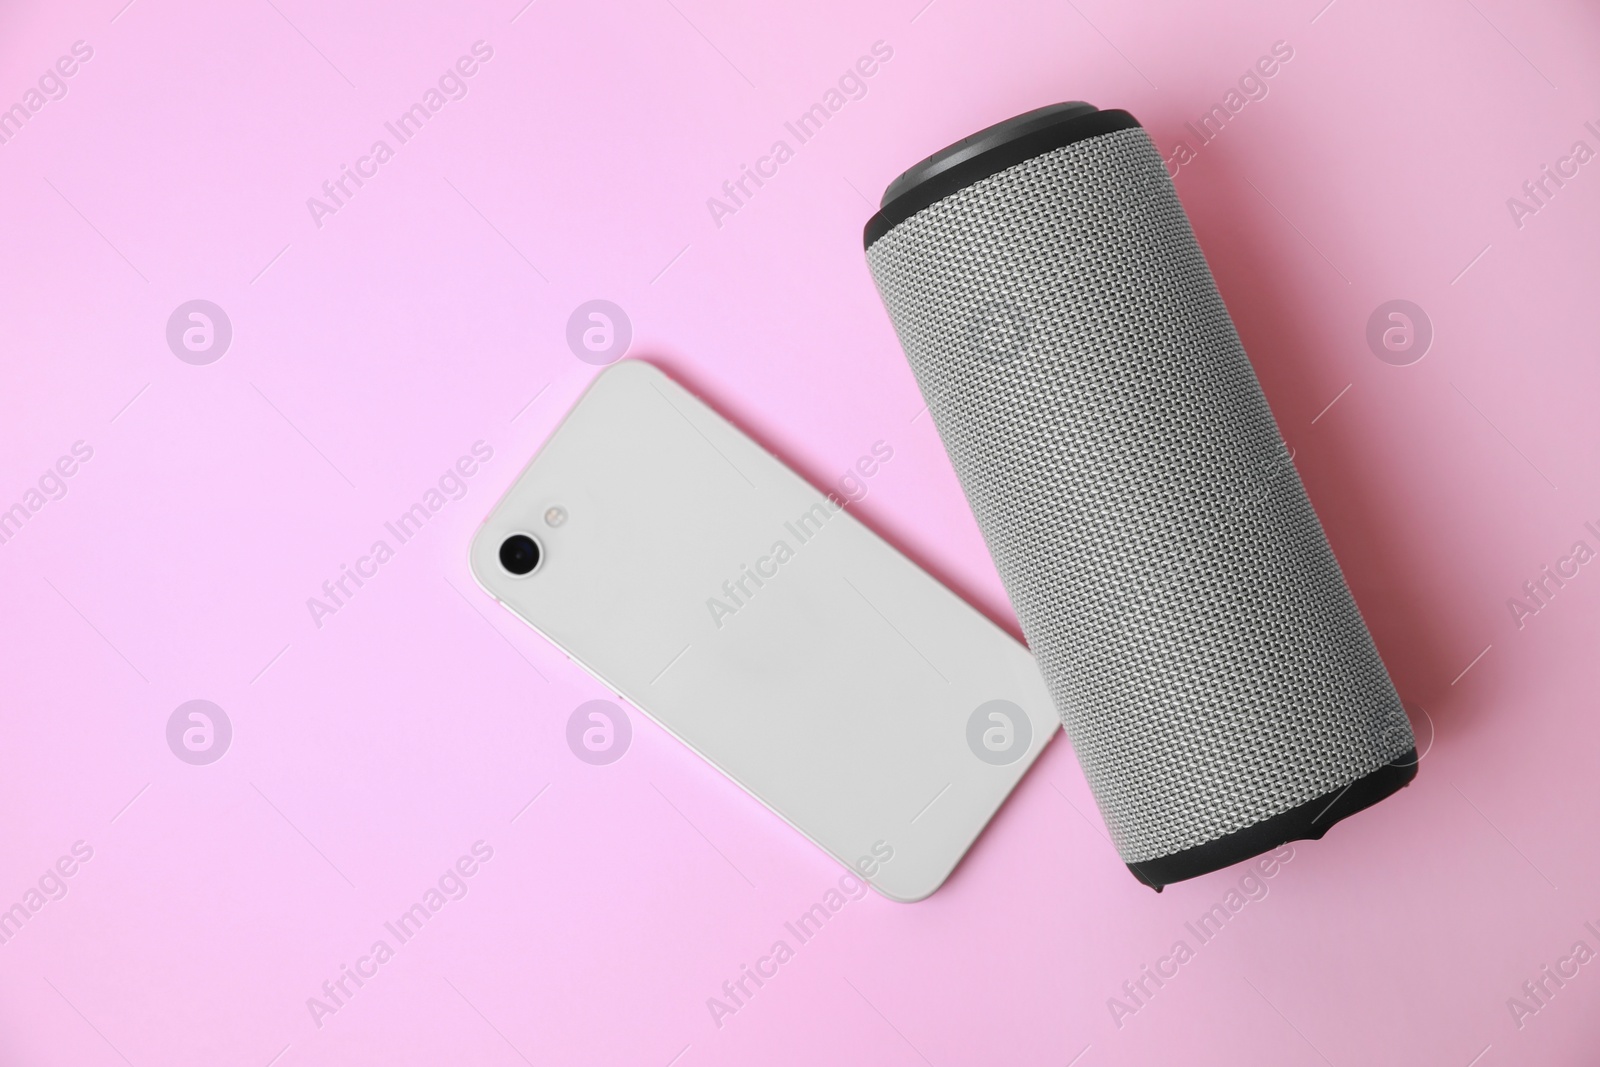 Photo of Portable bluetooth speaker and smartphone on pink background, flat lay with space for text. Audio equipment